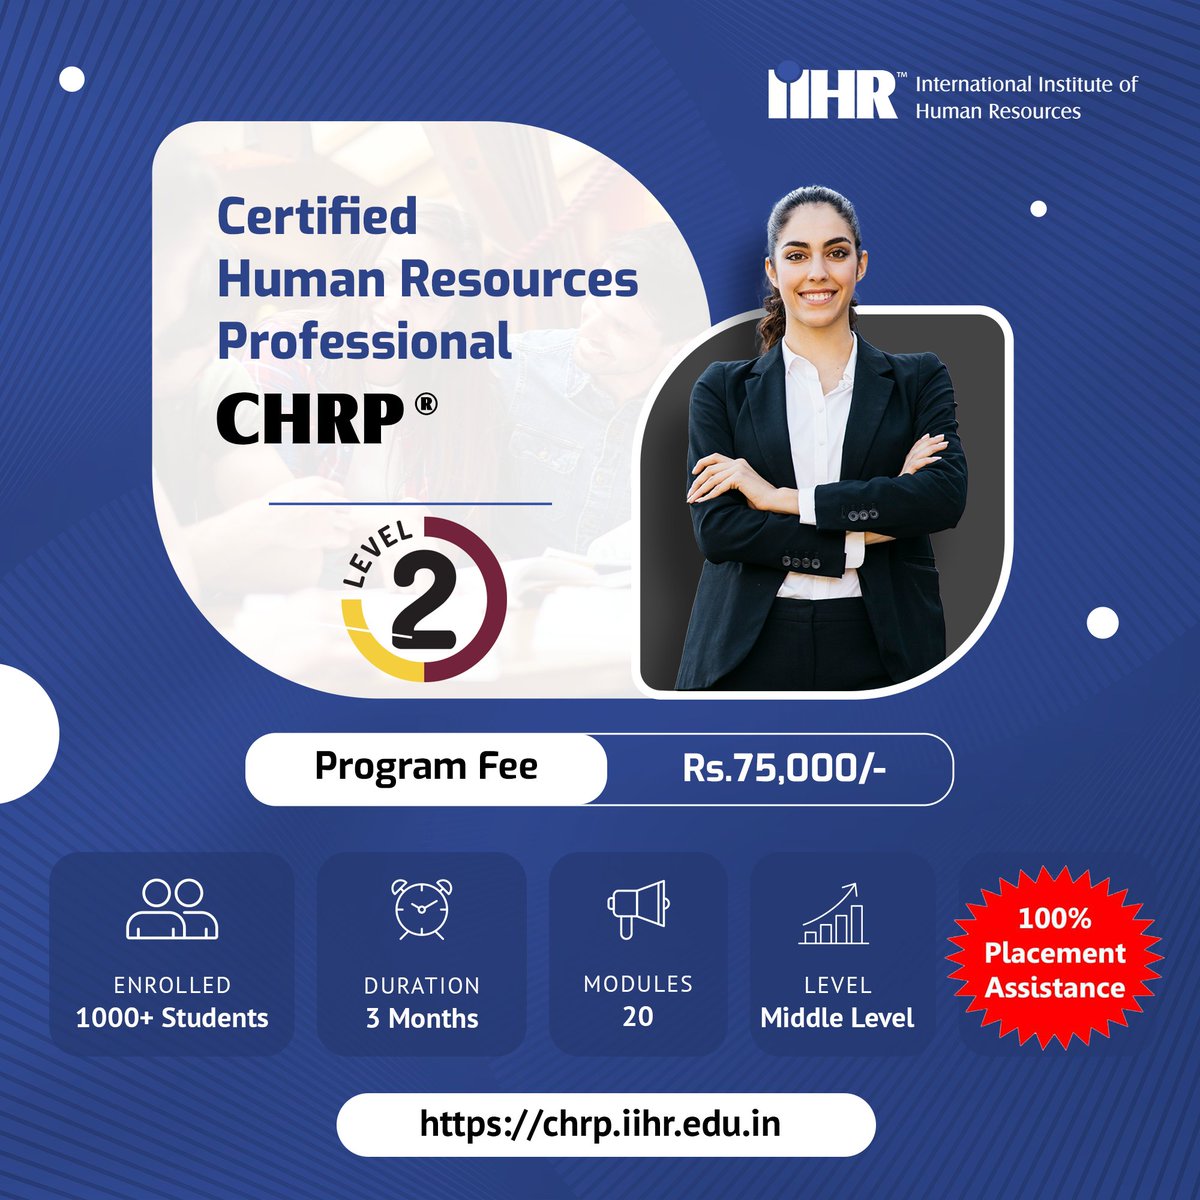 Propel your HR career with our Certified Human Resources Professional program! 3 months of intensive training, 100% Placement Assistance. Visit chrp.iihr.edu.in or call/WhatsApp 703 703 4447. Unlock your potential!  #HRProfessional #hrtraining  #hrcertifications #iihr